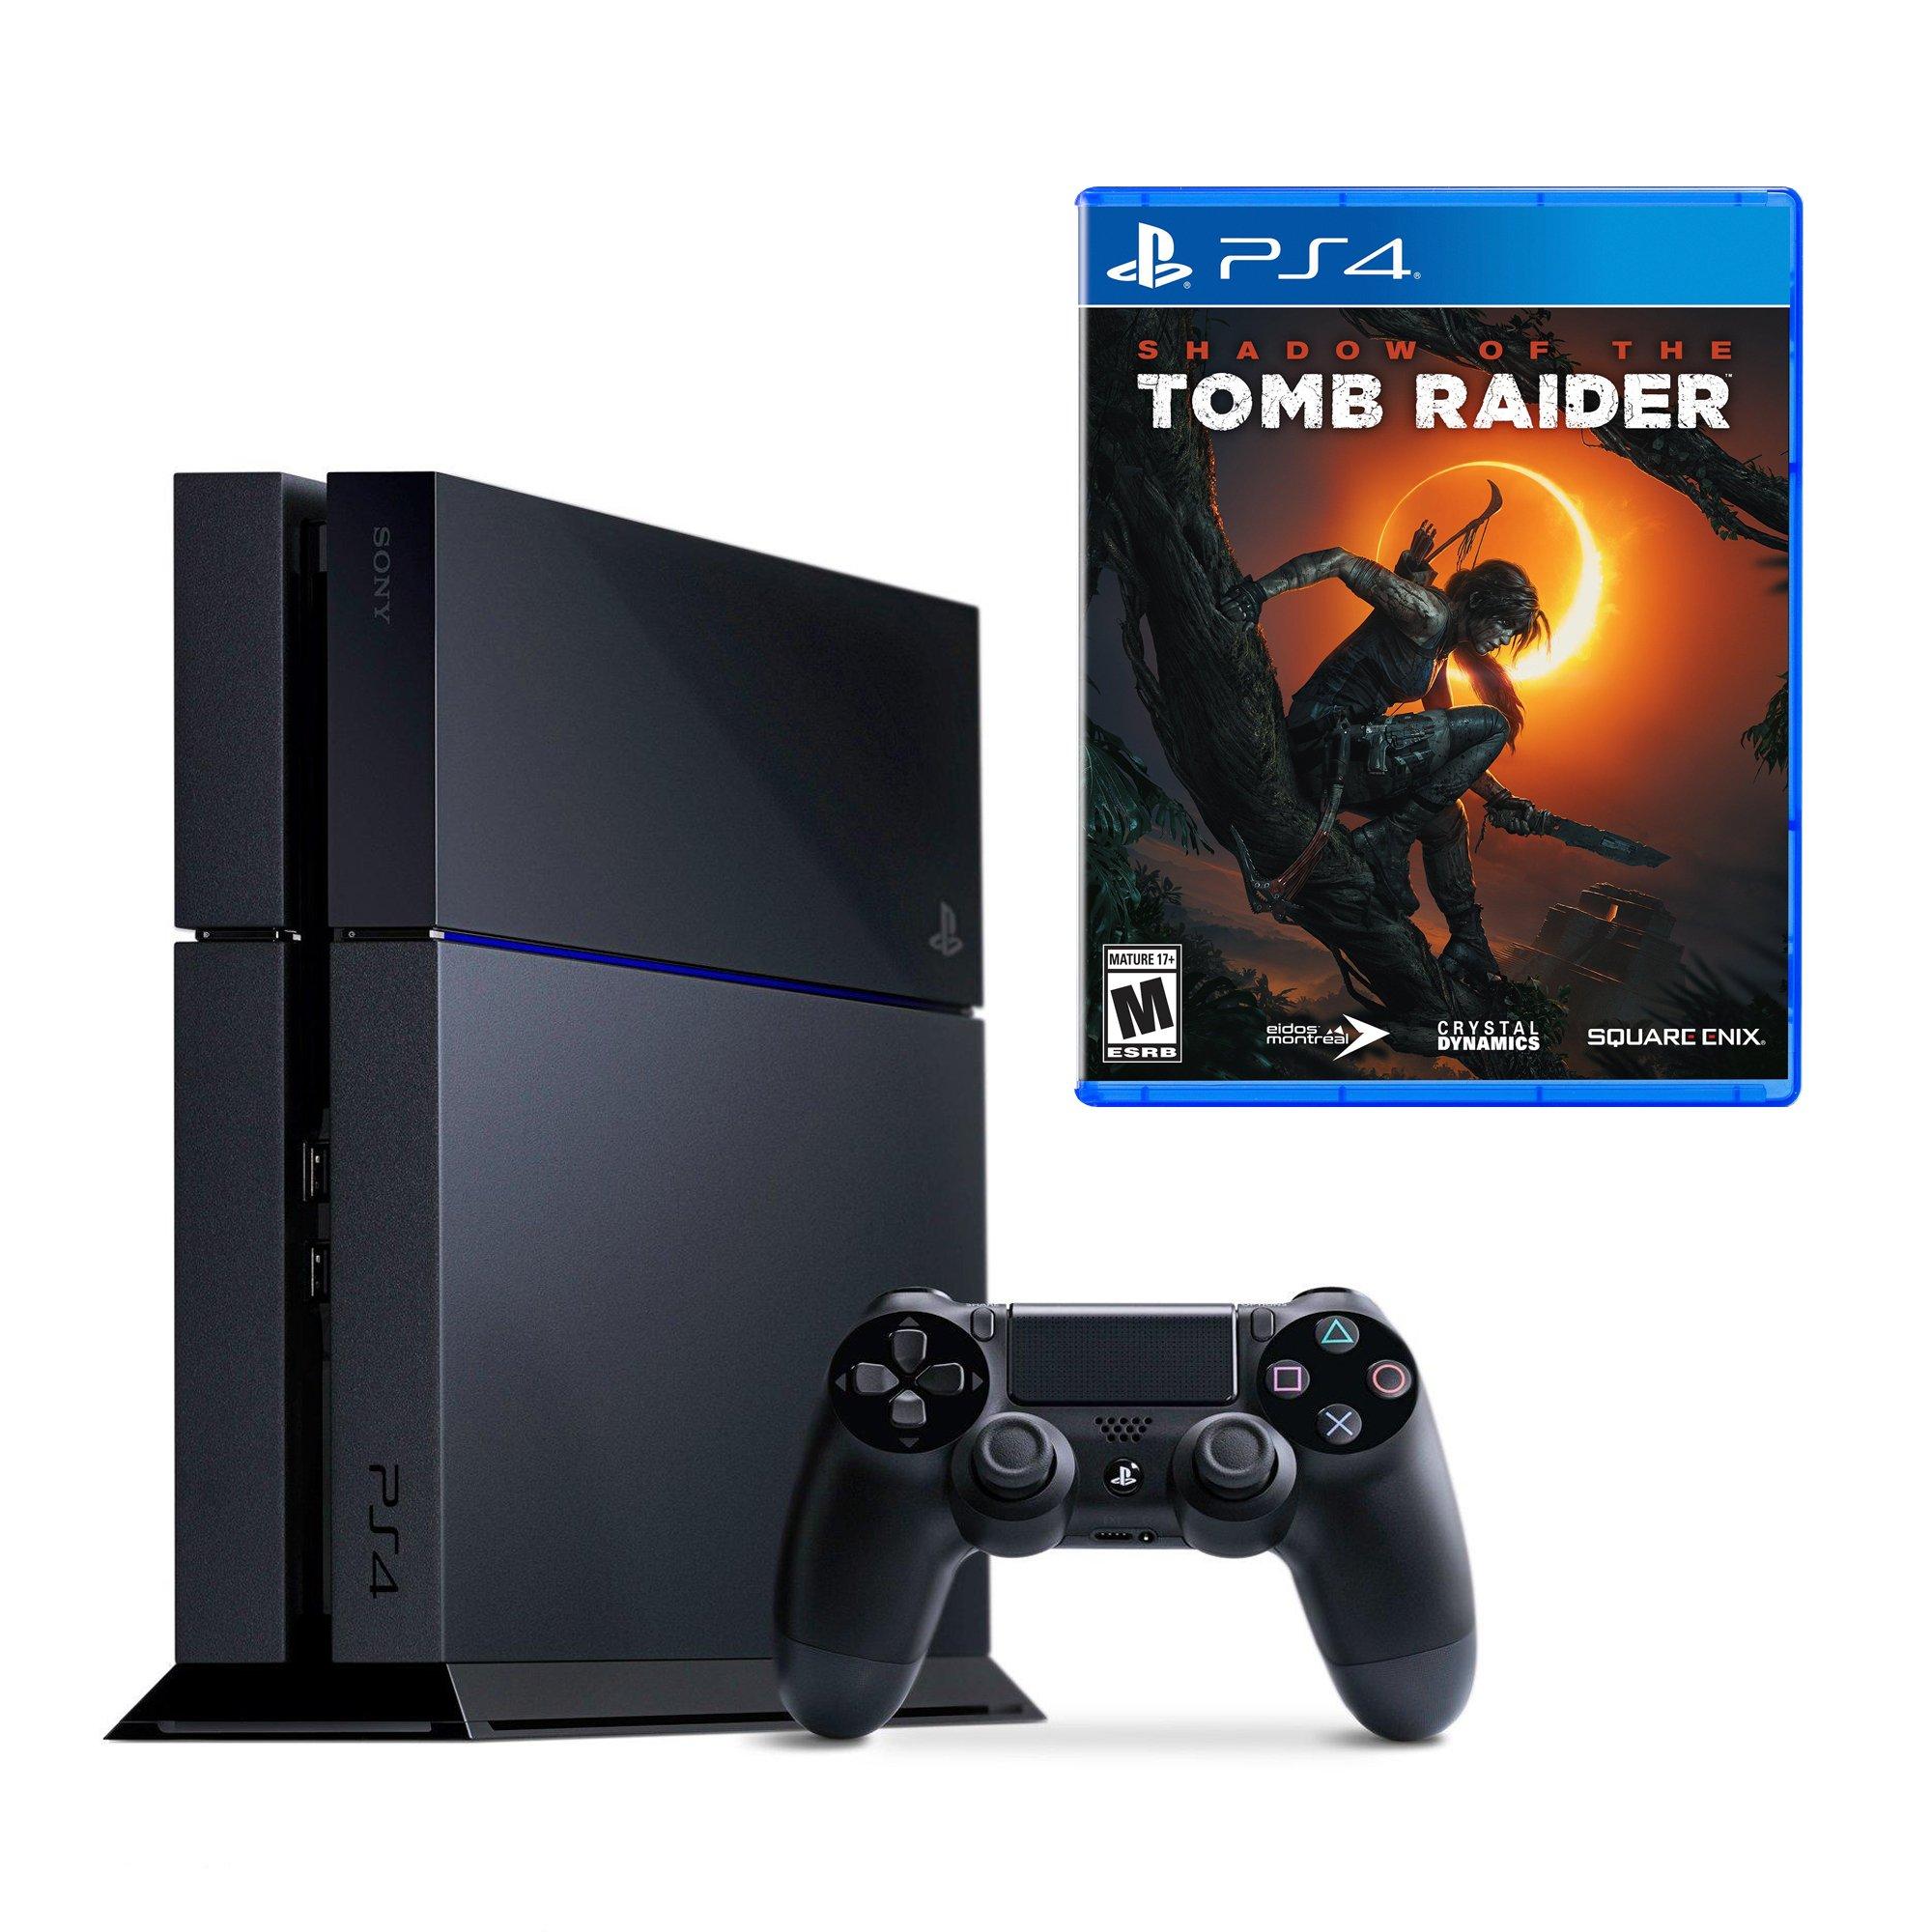 PlayStation 4 and Shadow of the Tomb Raider System Bundle (GameStop Premium Refurbished)